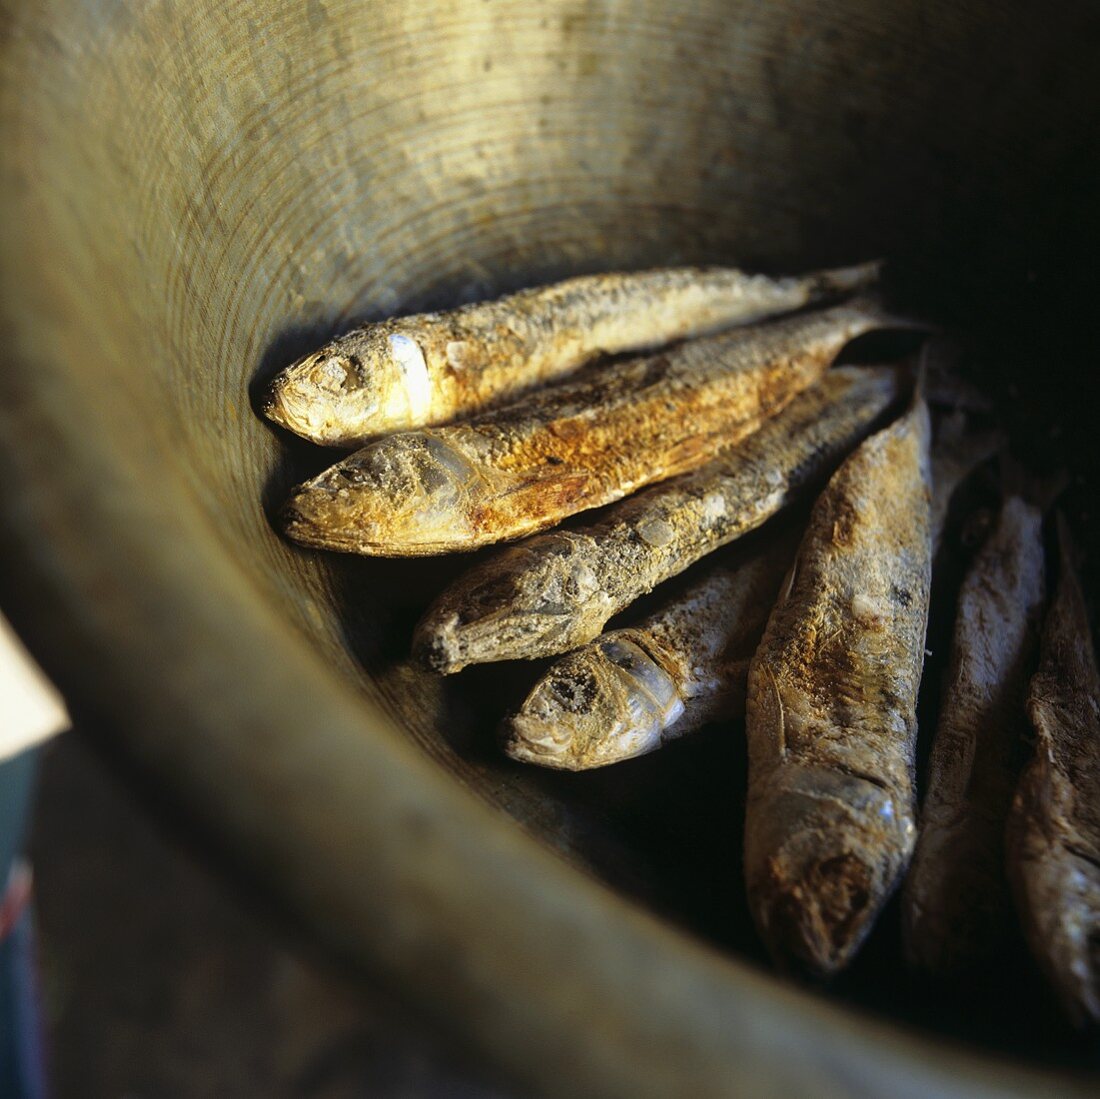 Salted, grilled sardines in a ceramic bowl